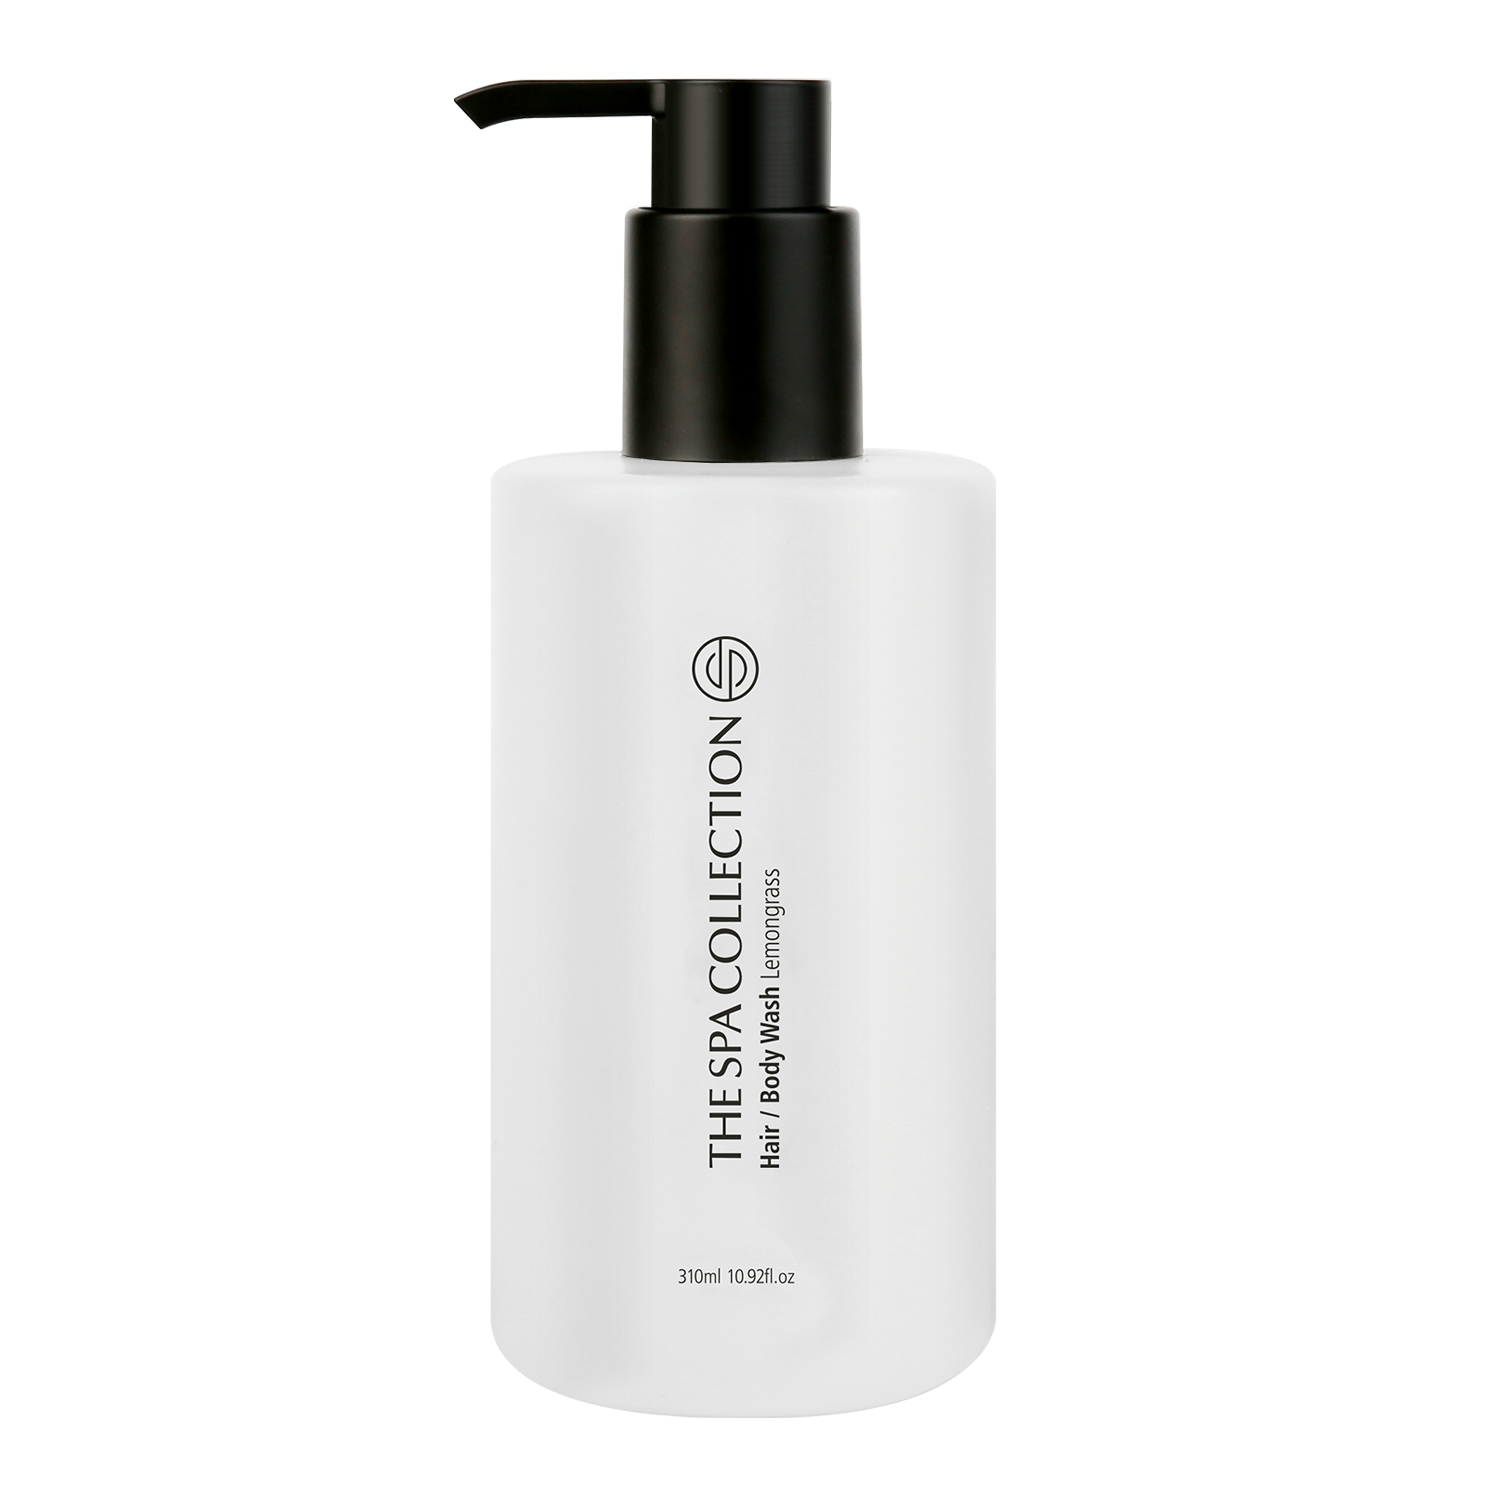 Eco-conscious hair and body wash with Lemongrass (310ml) by The Spa Collection in a minimal, white and aesthetic bottle